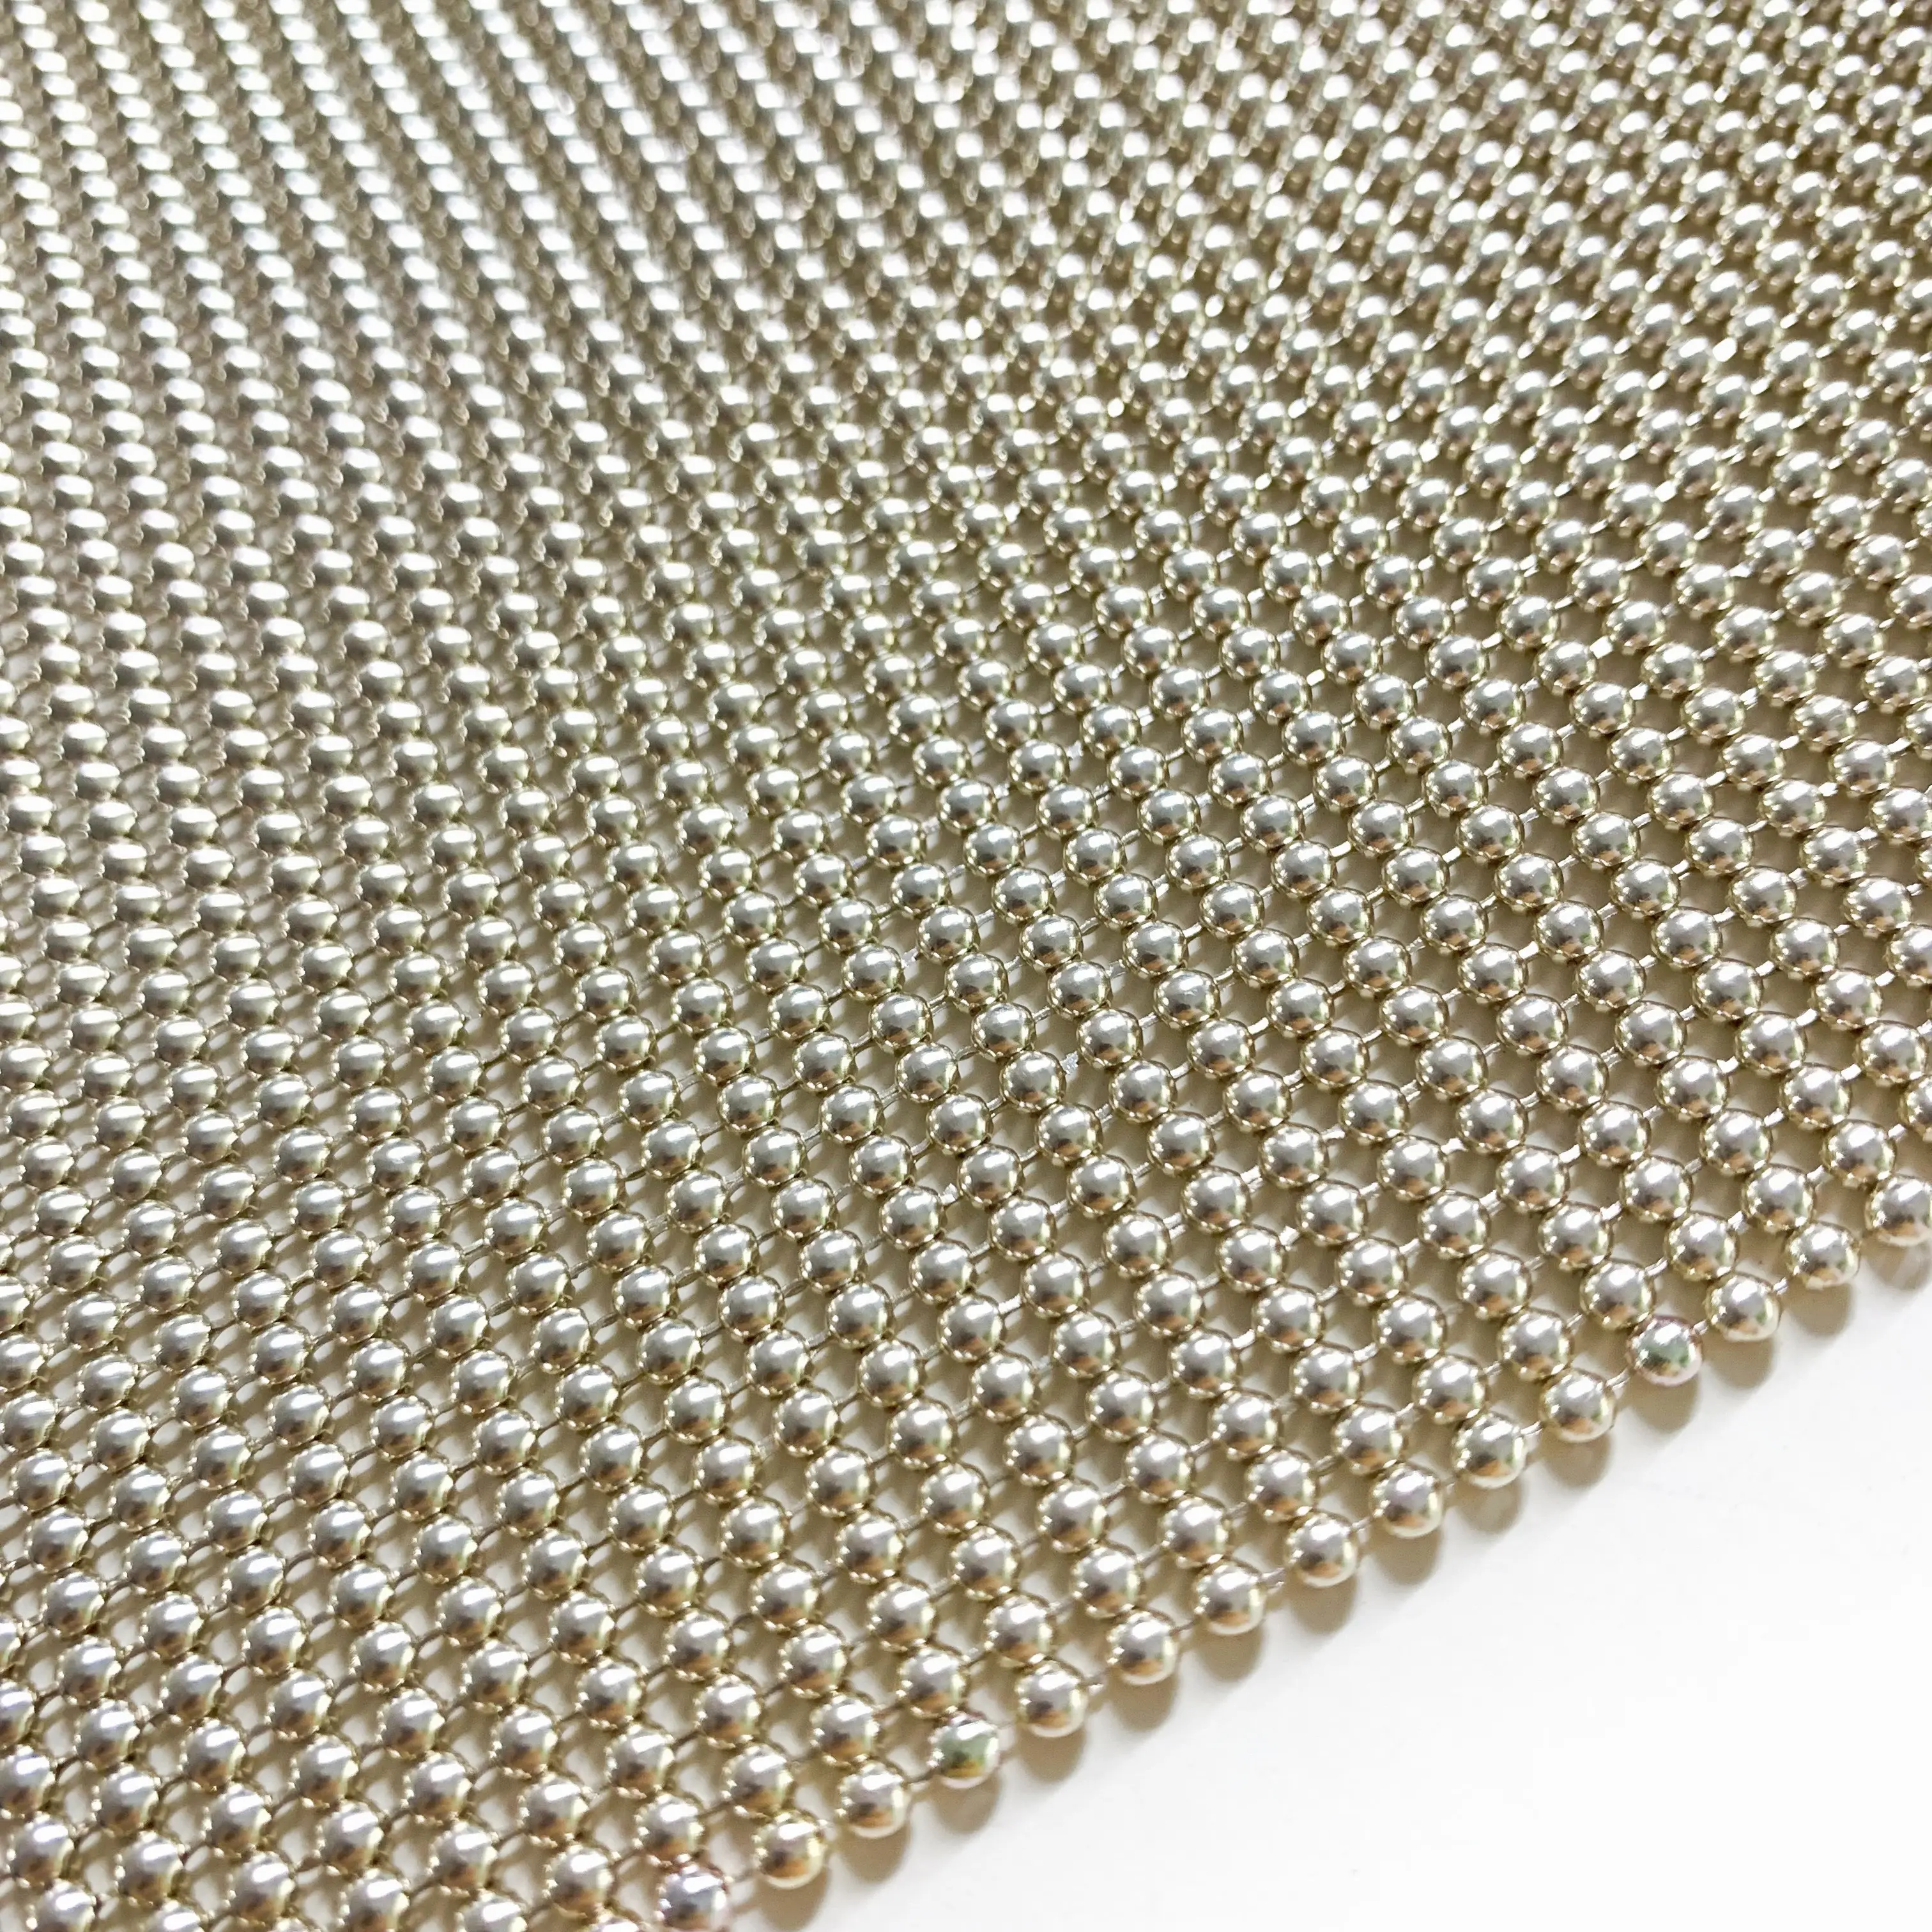 Gold Beaded Mesh Fabric Metallic Fabric Aluminum Sequined Chain Mail Fabric For Home Textile